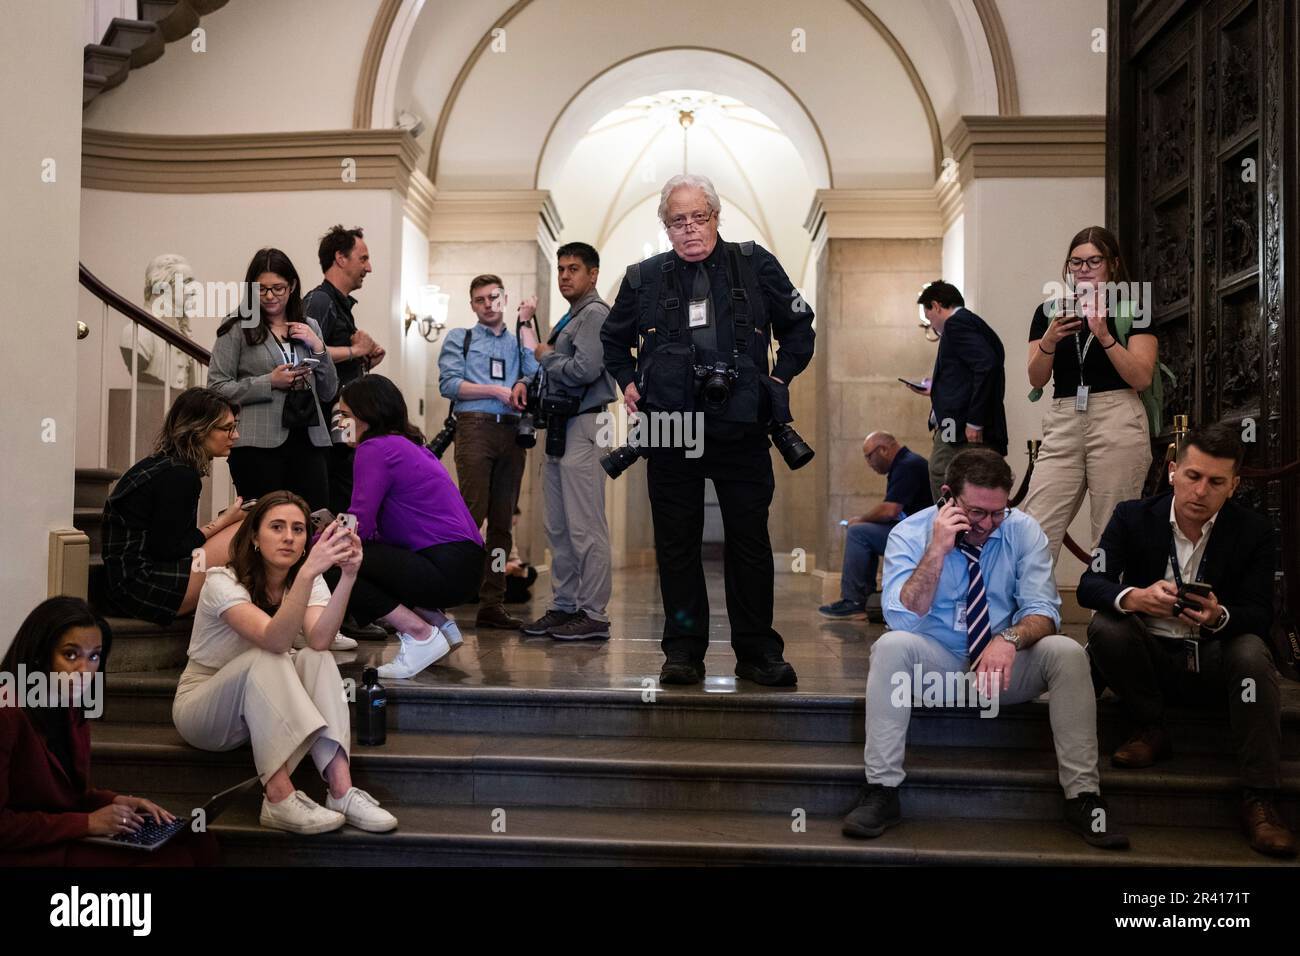 UNITED STATES - MAY 23: J. Scott Applewhite, center, of the Associated Press,  and members of the media wait for the arrival of Speaker of the House Kevin  McCarthy, R-Calif., in the